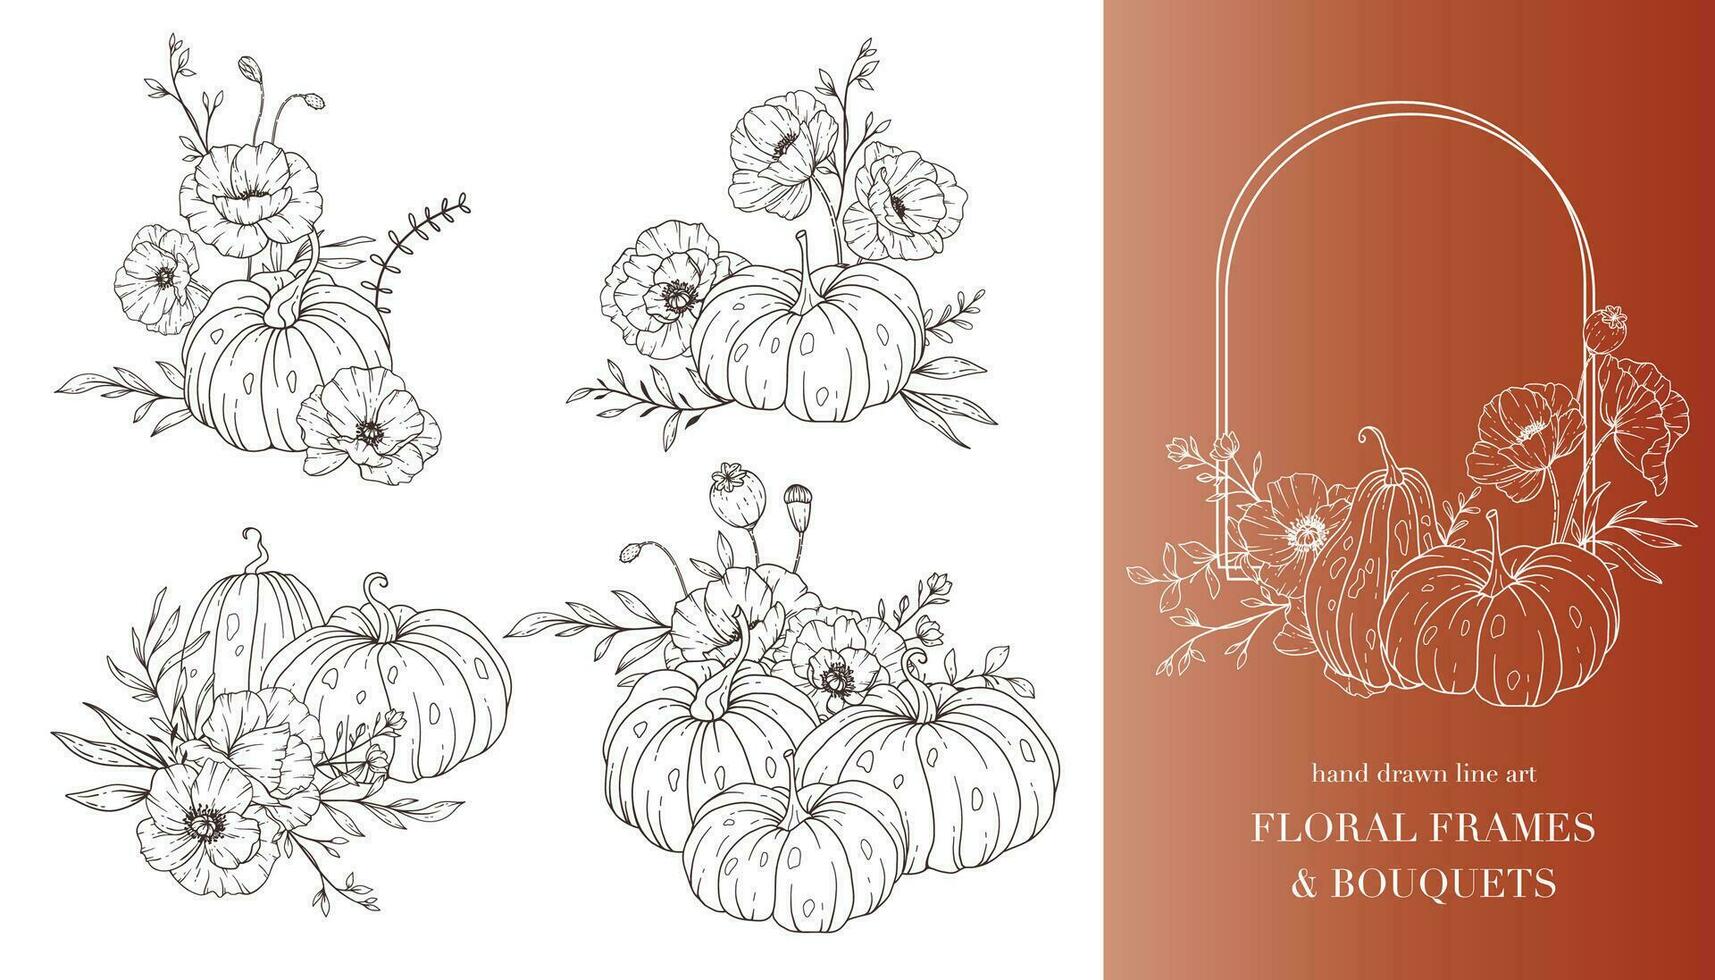 Pumpkins with Wildflowers Line Art Illustration, Outline Pumpkin arrangement Hand Drawn Illustration. Coloring Page with Pumpkins.  Thanksgiving Pumpkins Frame. Thanksgiving Pumpkins set vector